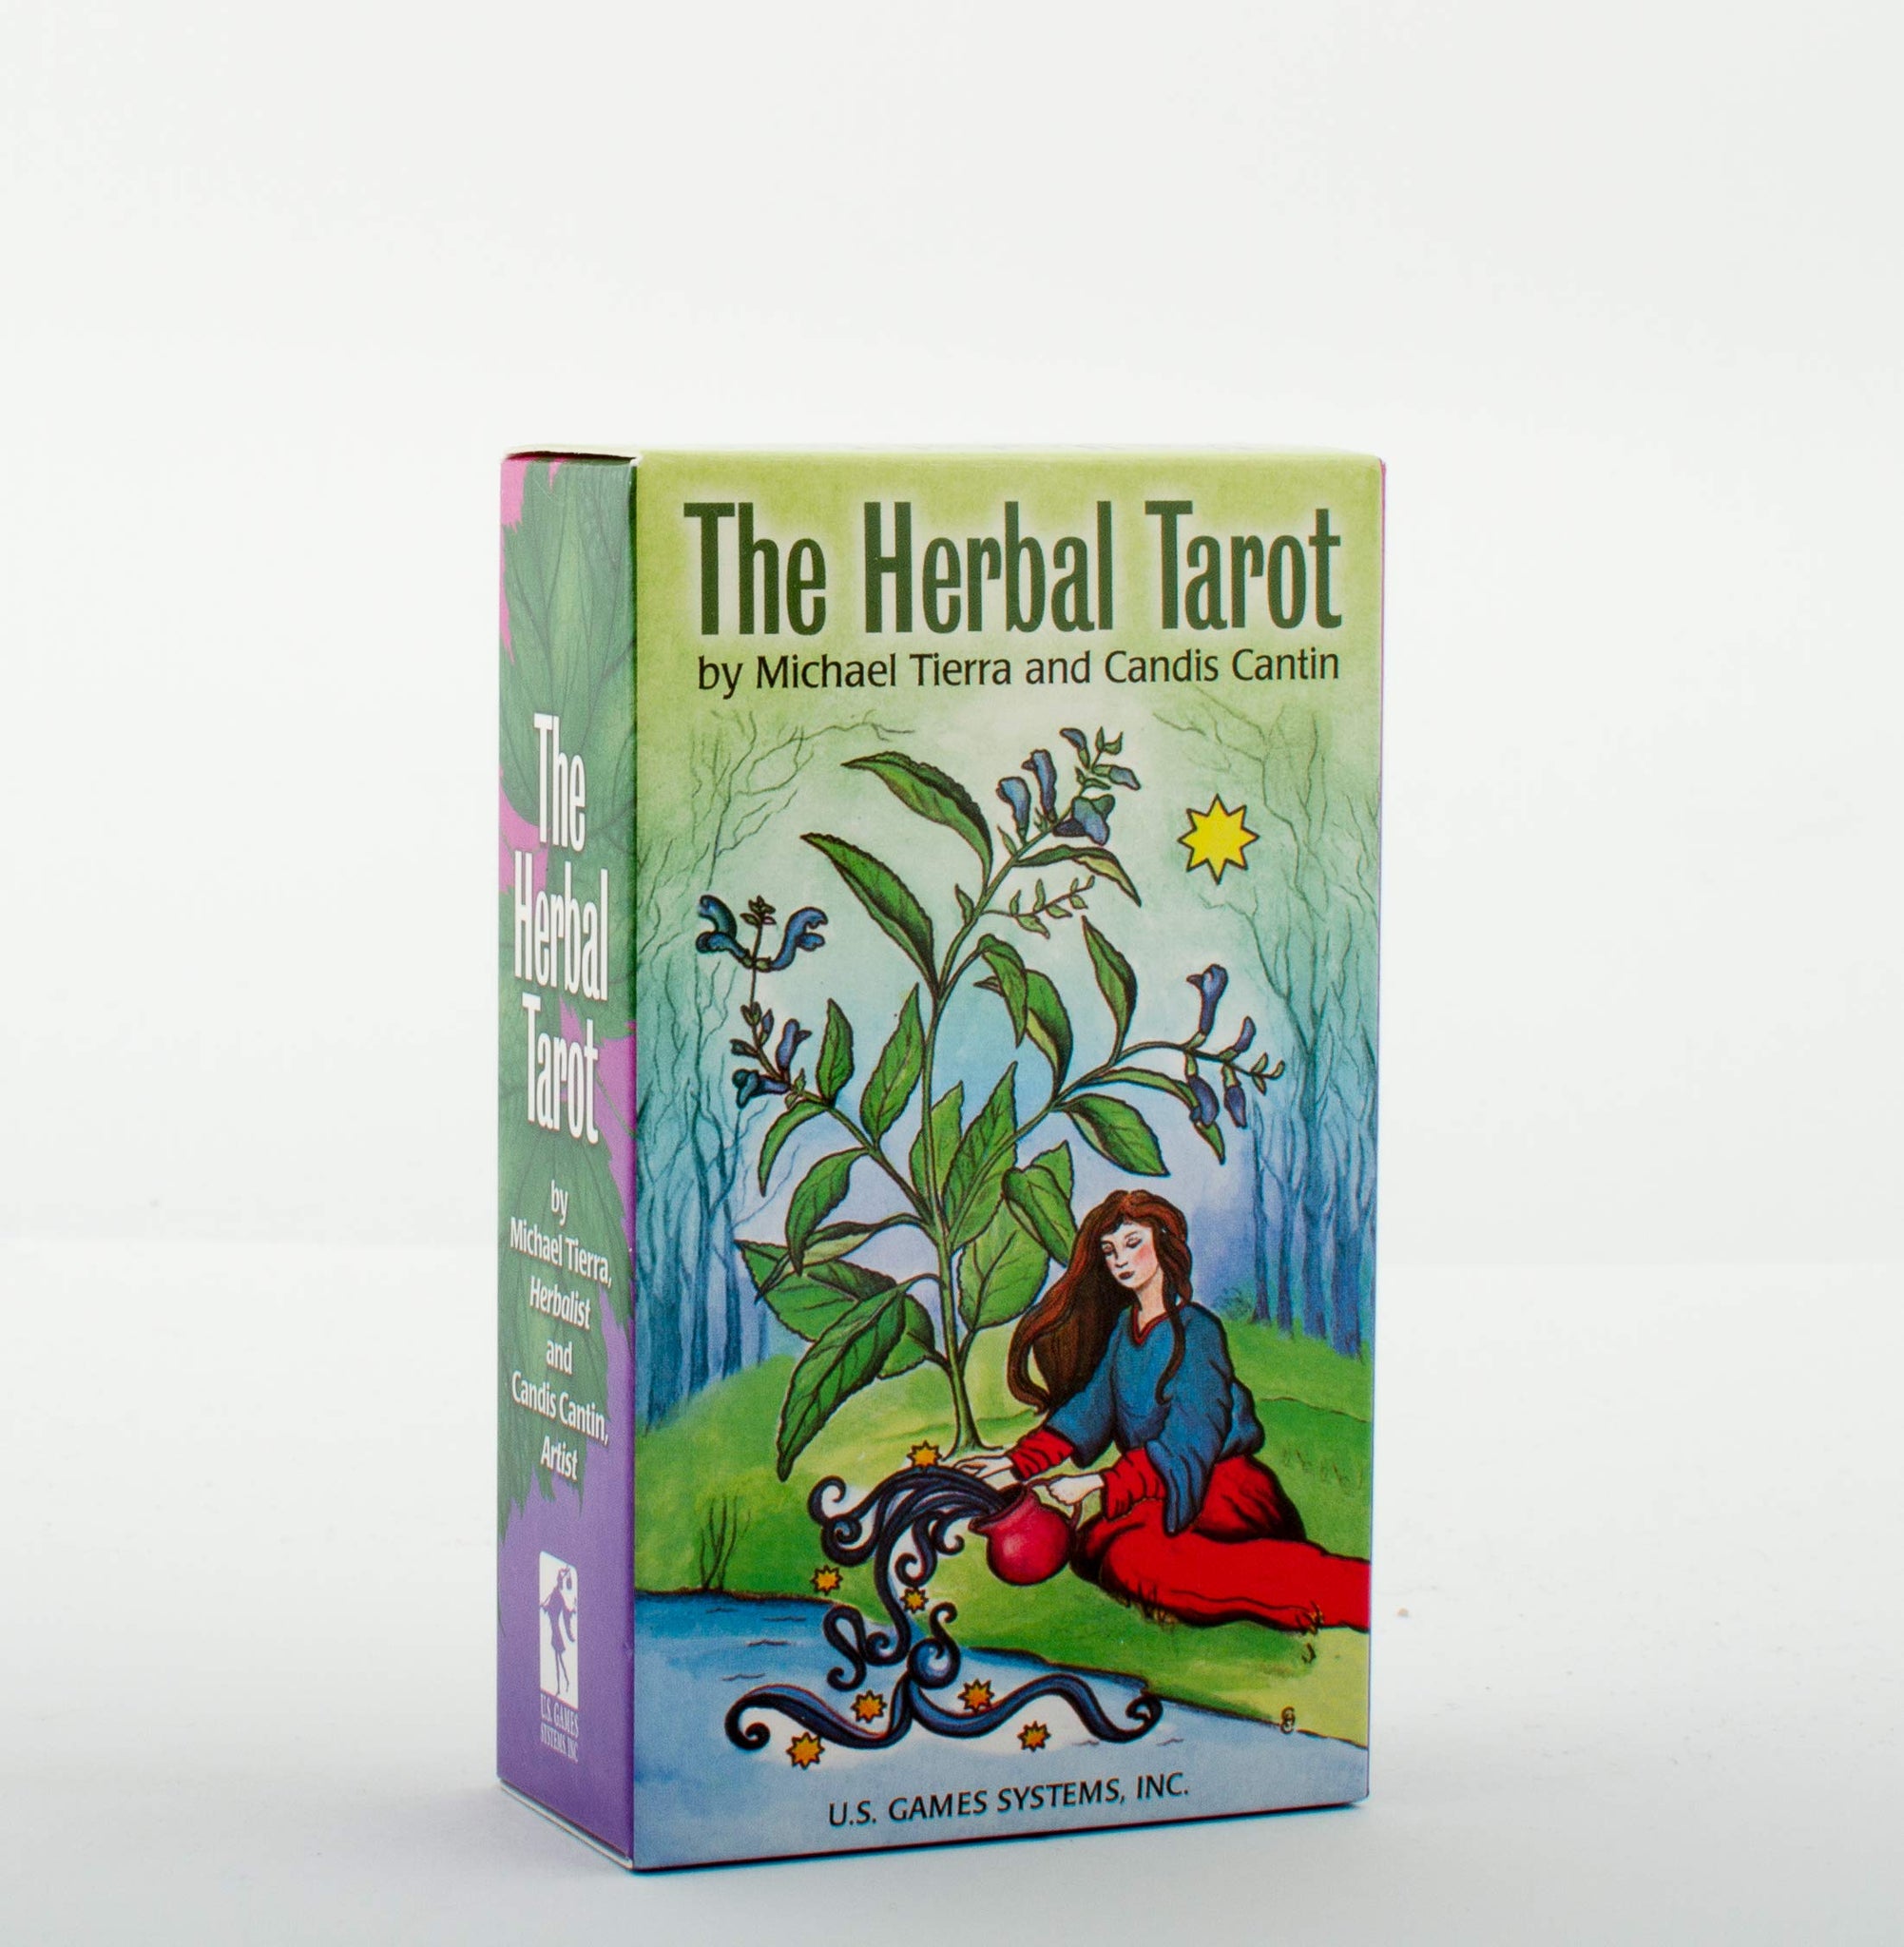 The Herbal Tarot by Michael Tierra & Candice Cantin